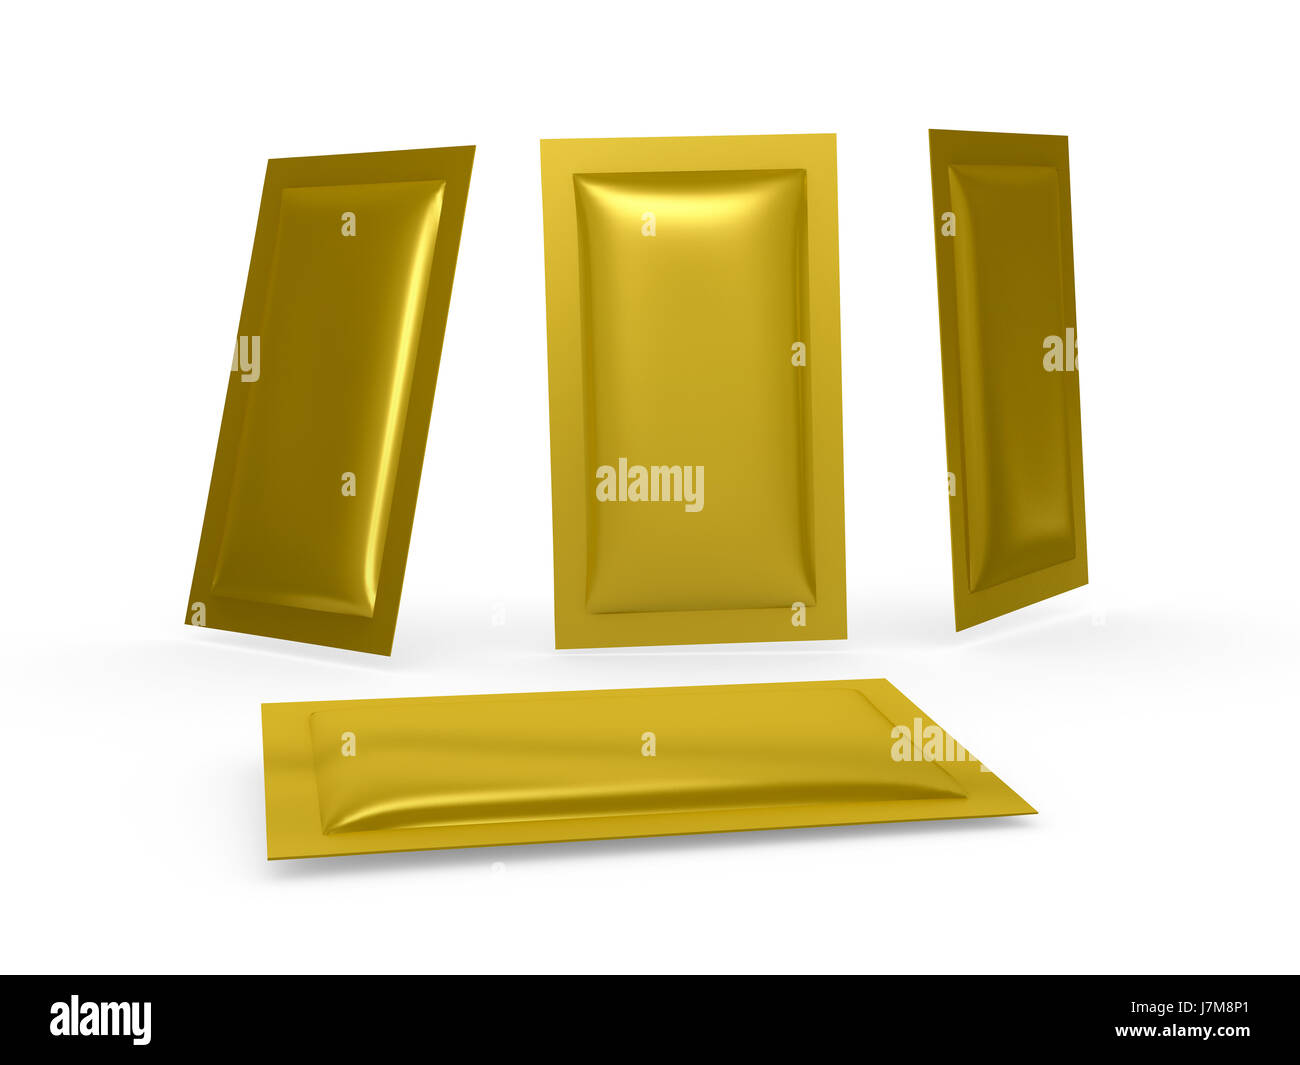 Chocolate bar with gold foil wrapper Stock Photo - Alamy